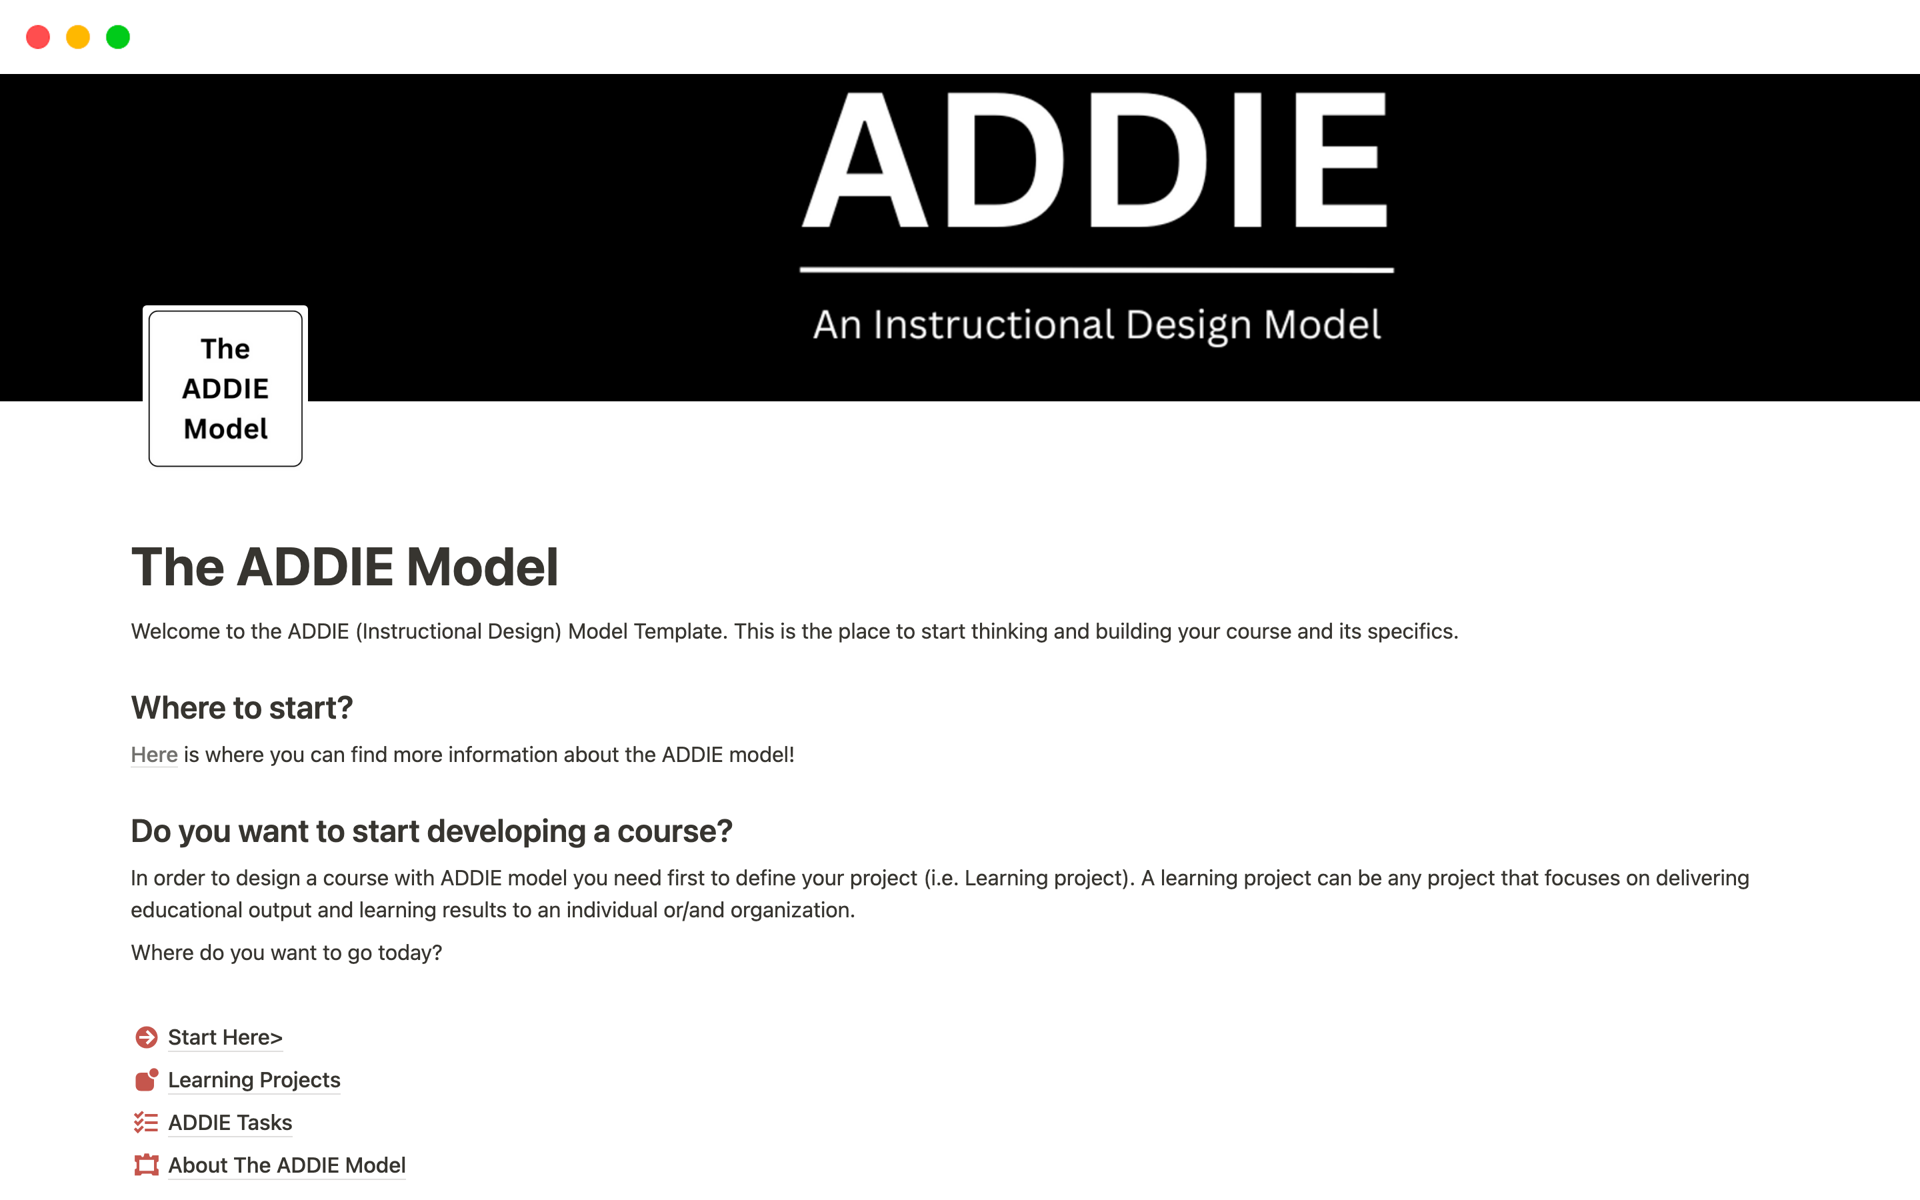 A tool to help you build a course with ADDIE instructional design model.